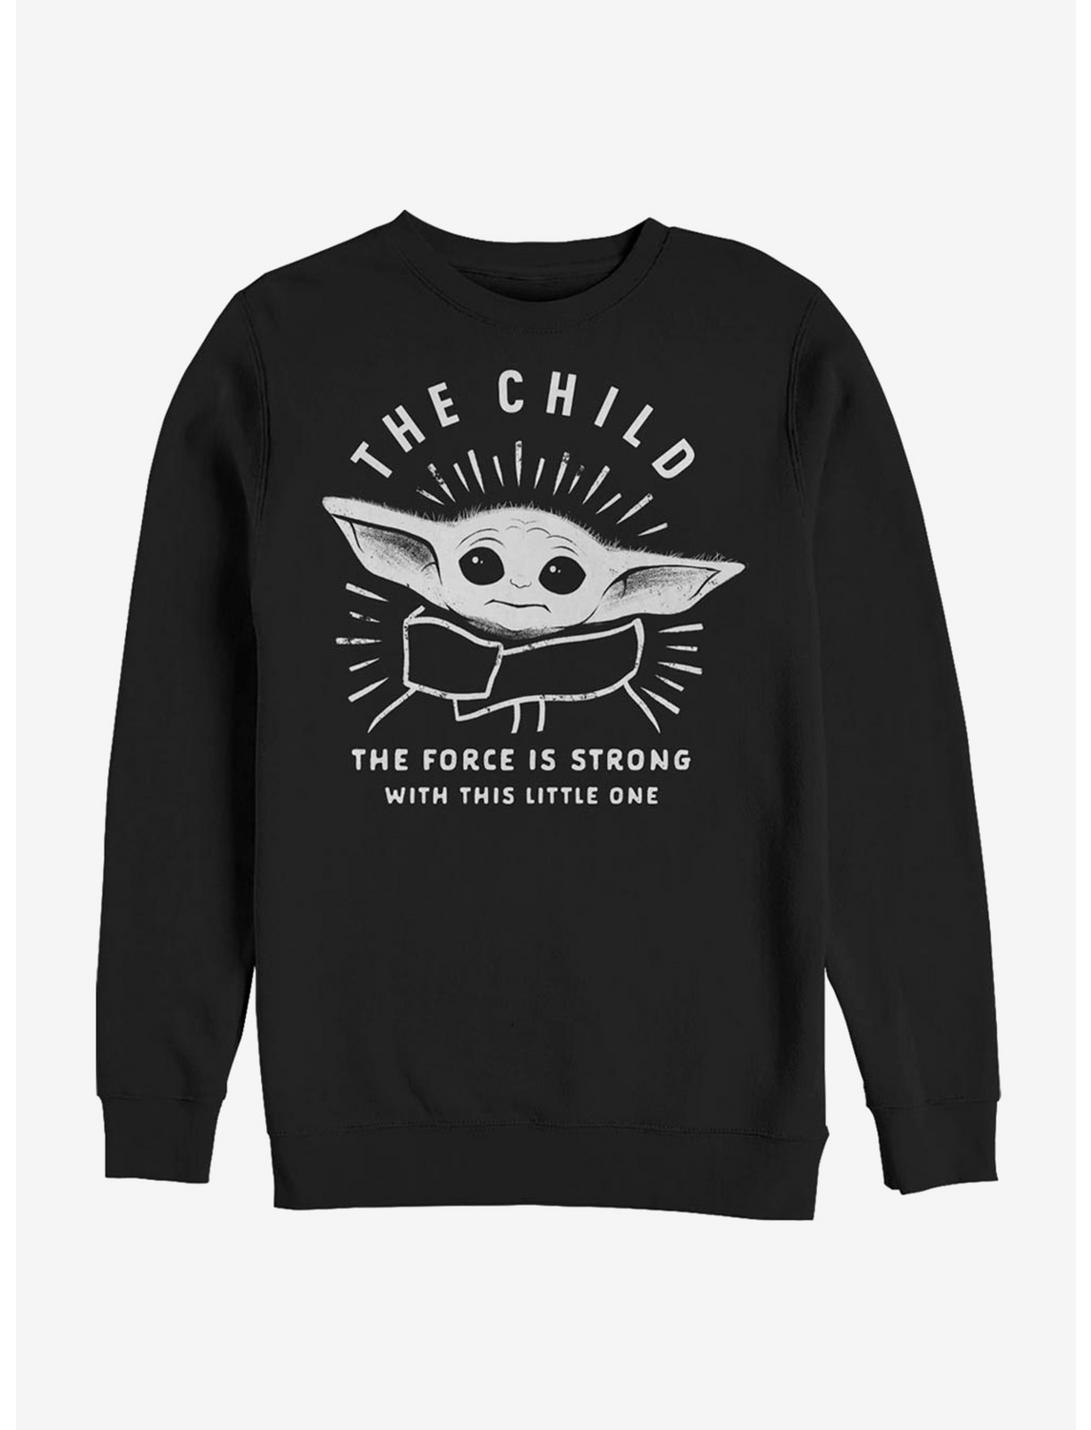 Star Wars The Mandalorian The Child The Force Is Strong Crew Sweatshirt, BLACK, hi-res